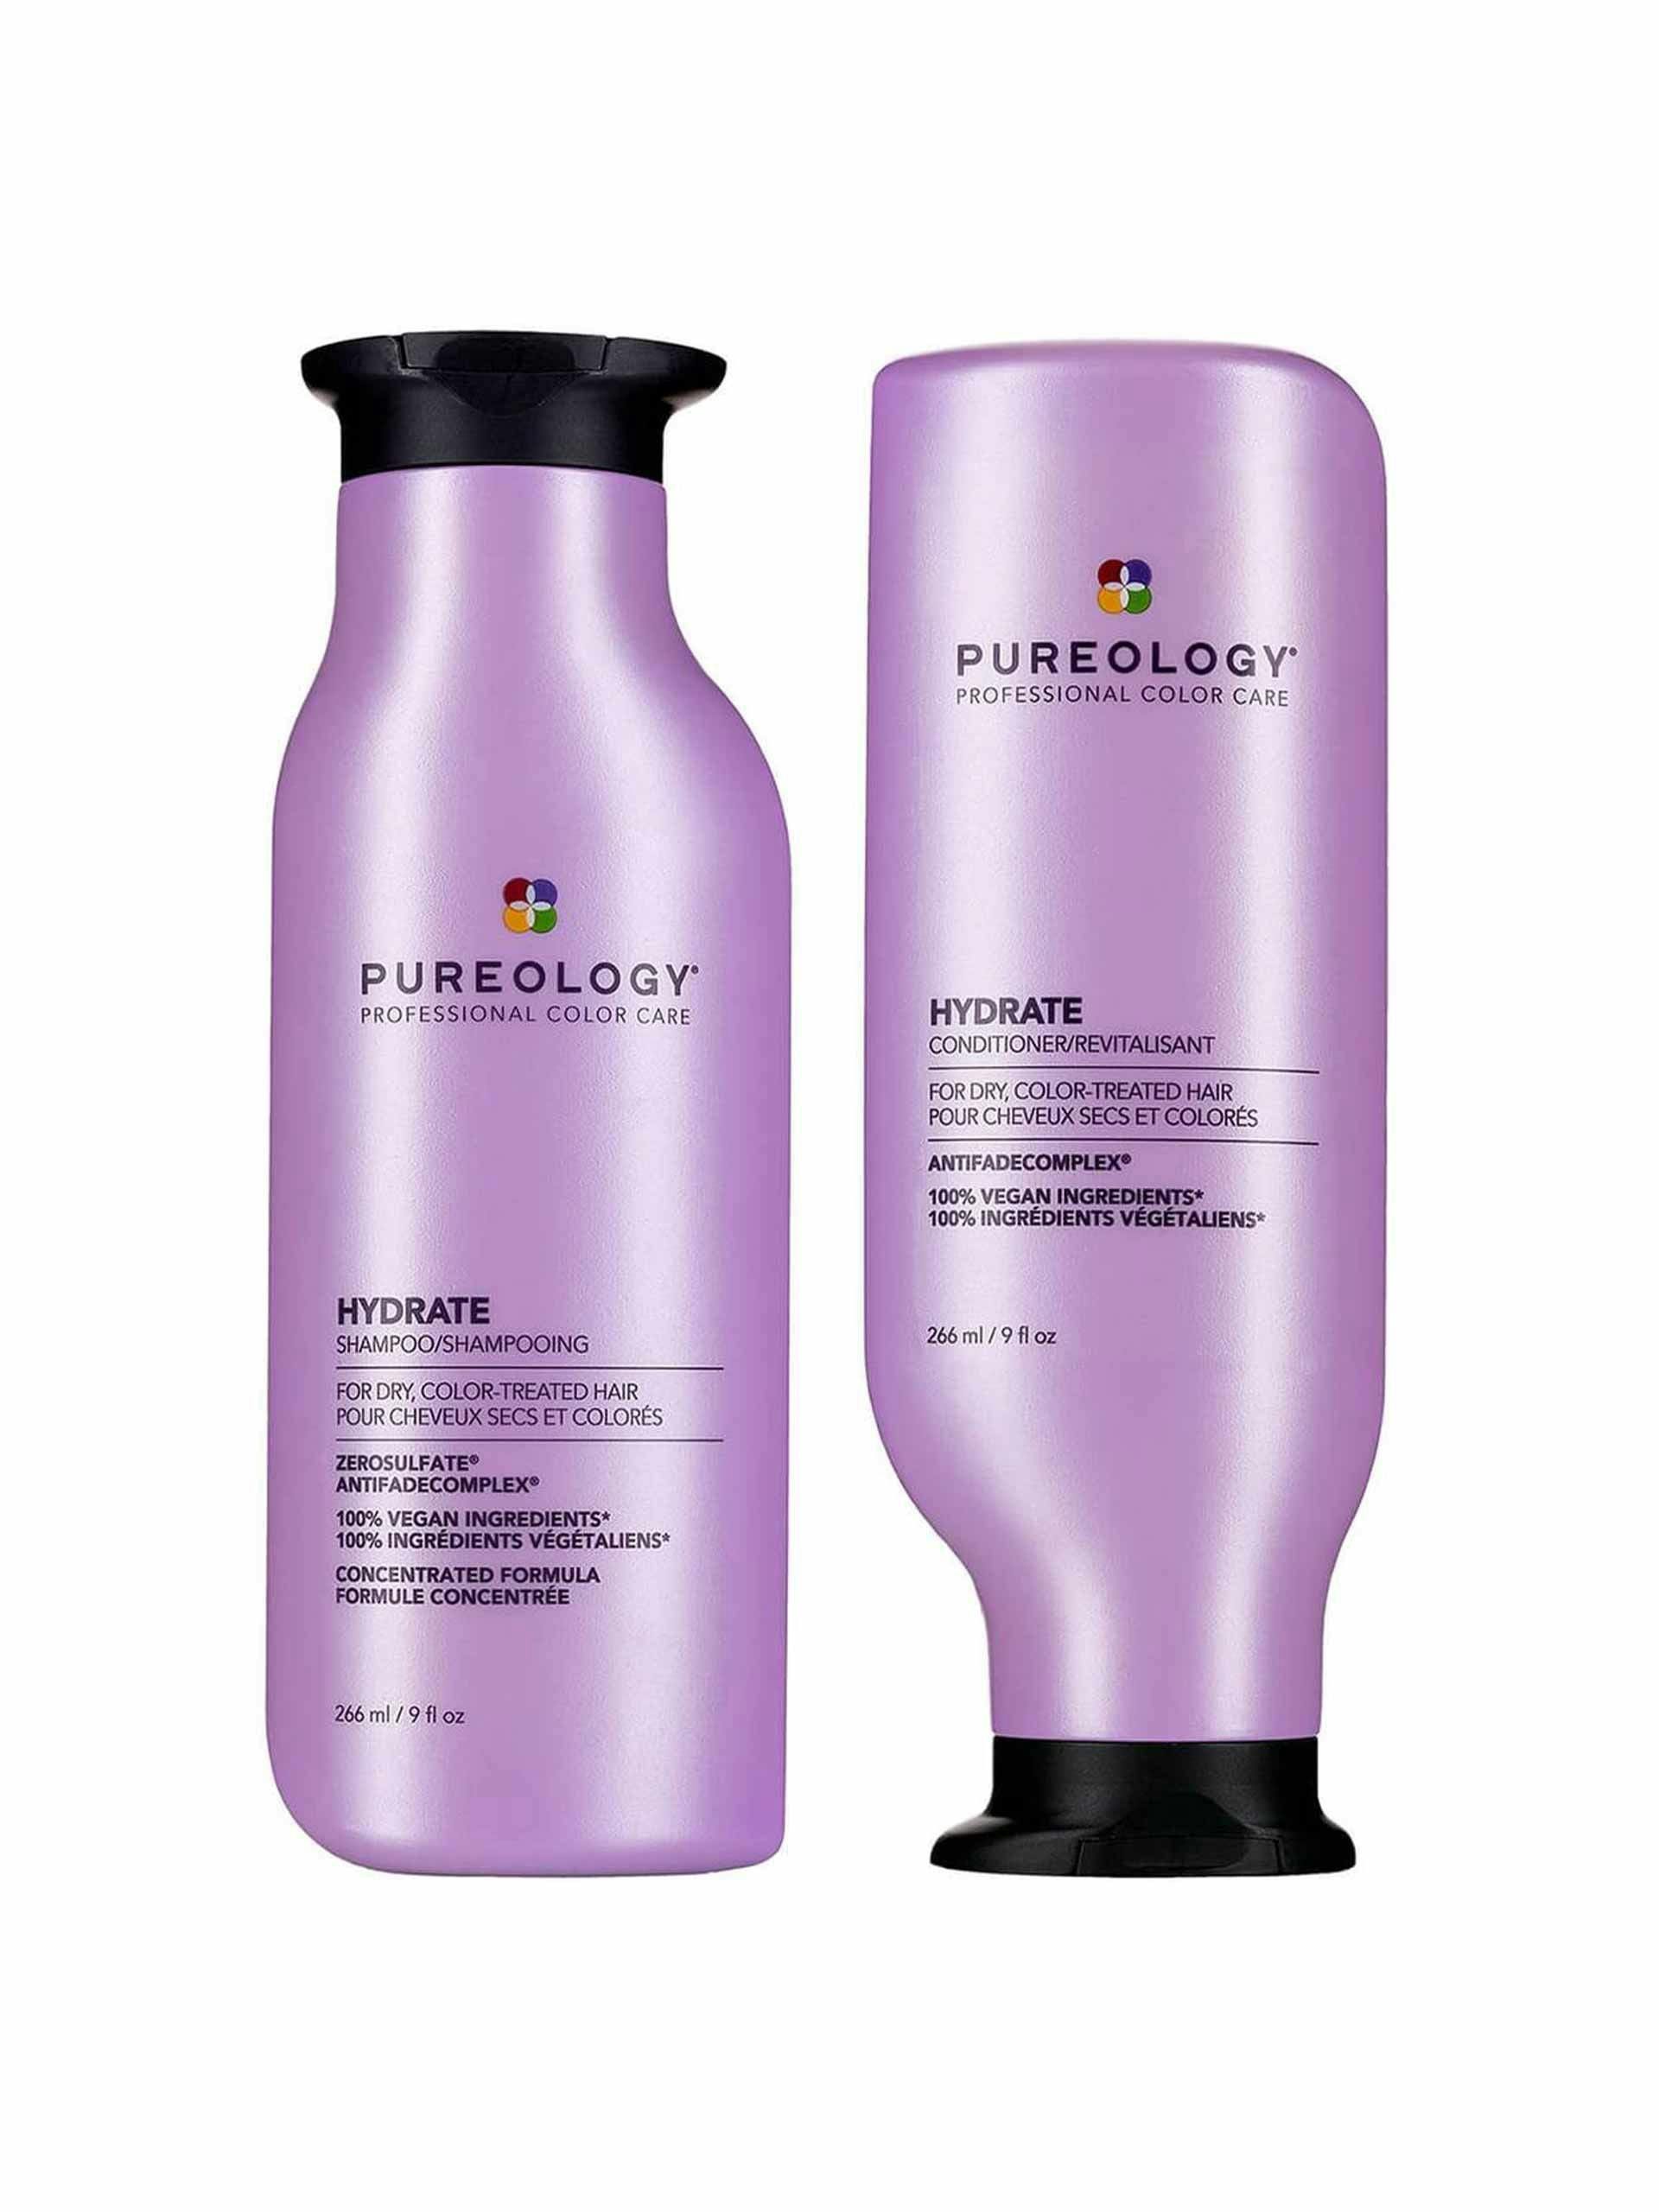 Hydrating shampoo and conditioner duo